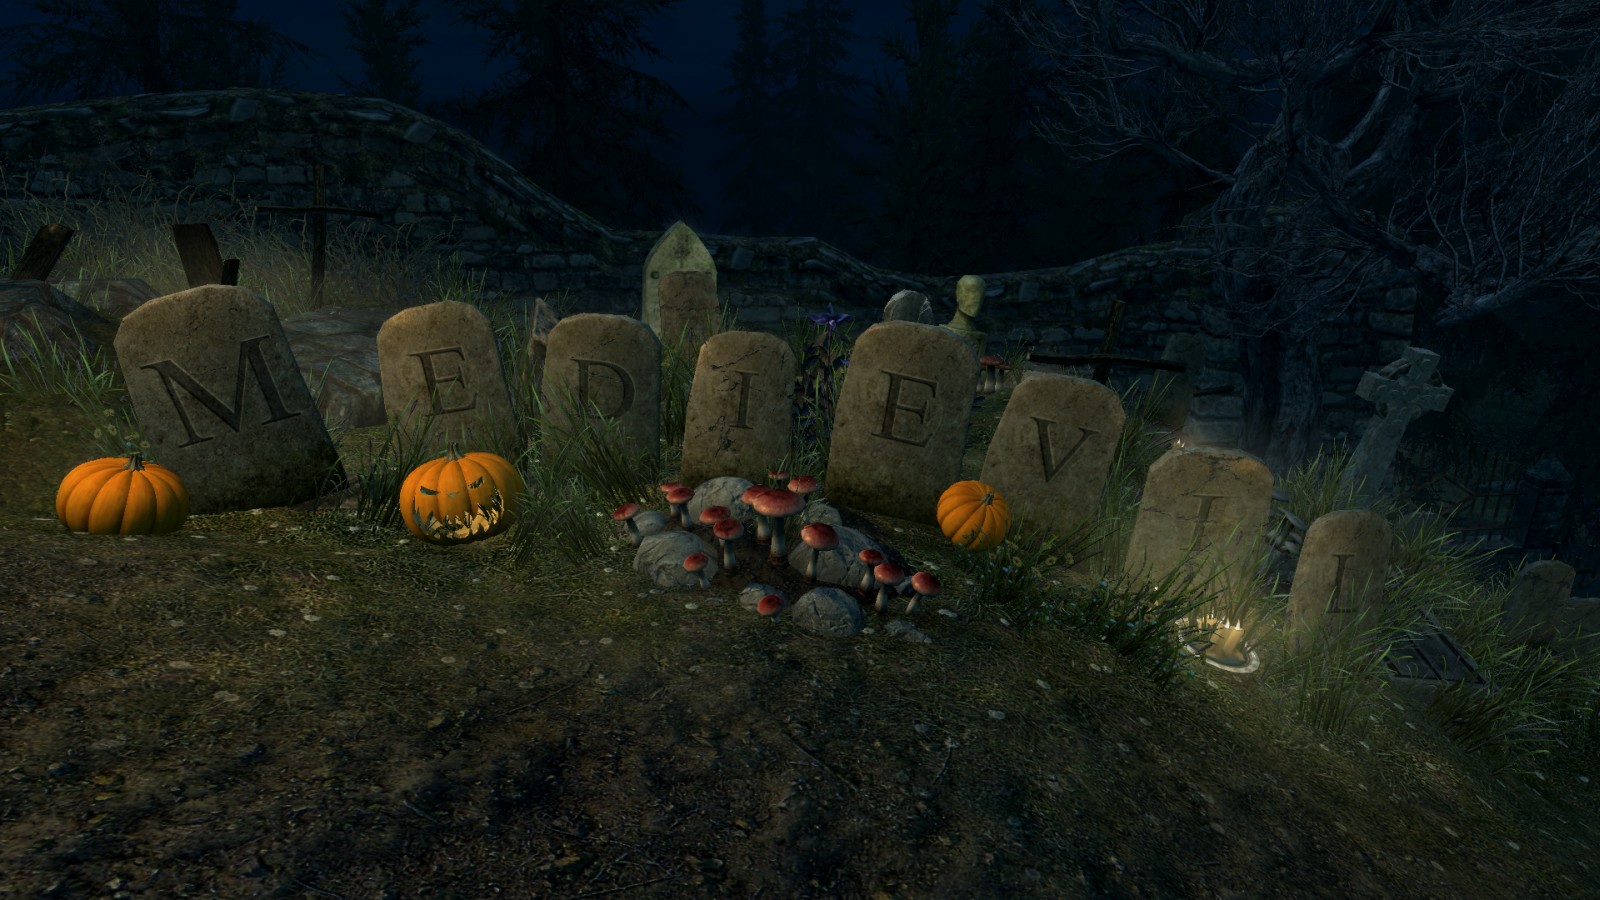 Graveyard Medievil Image Medievil Hero Of Gallowmere Mod For Images, Photos, Reviews